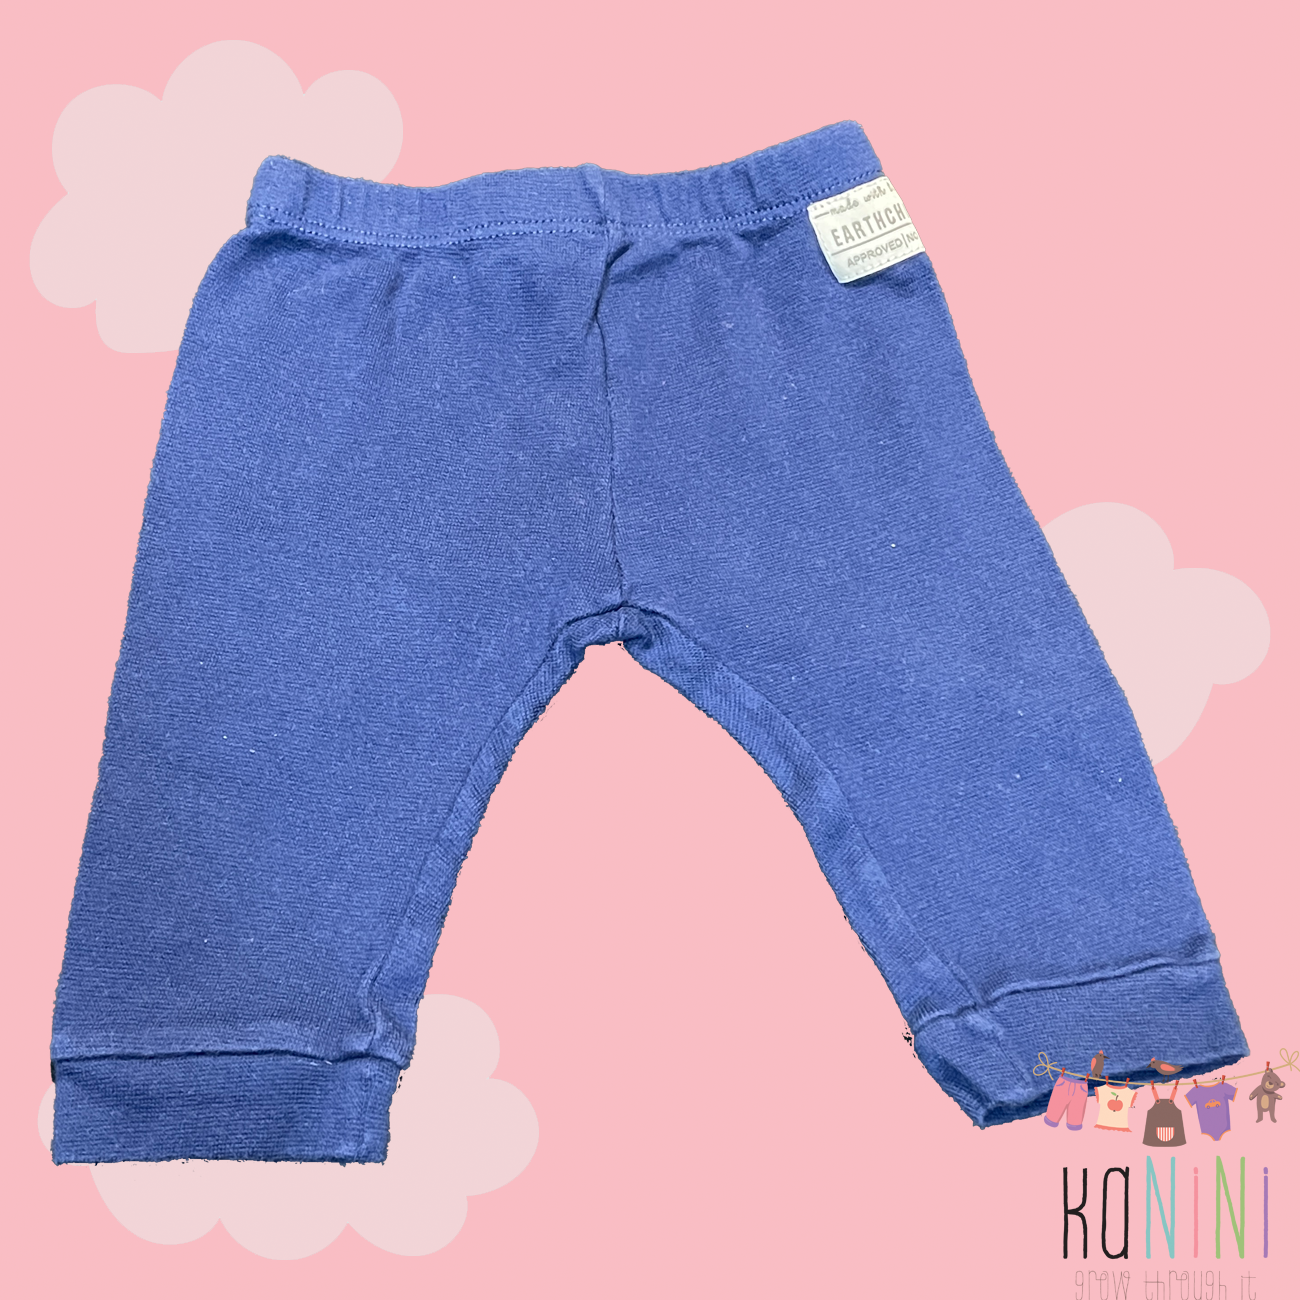 Featured image for “Earthchild 3 - 6 Months Unisex Navy Leggings”